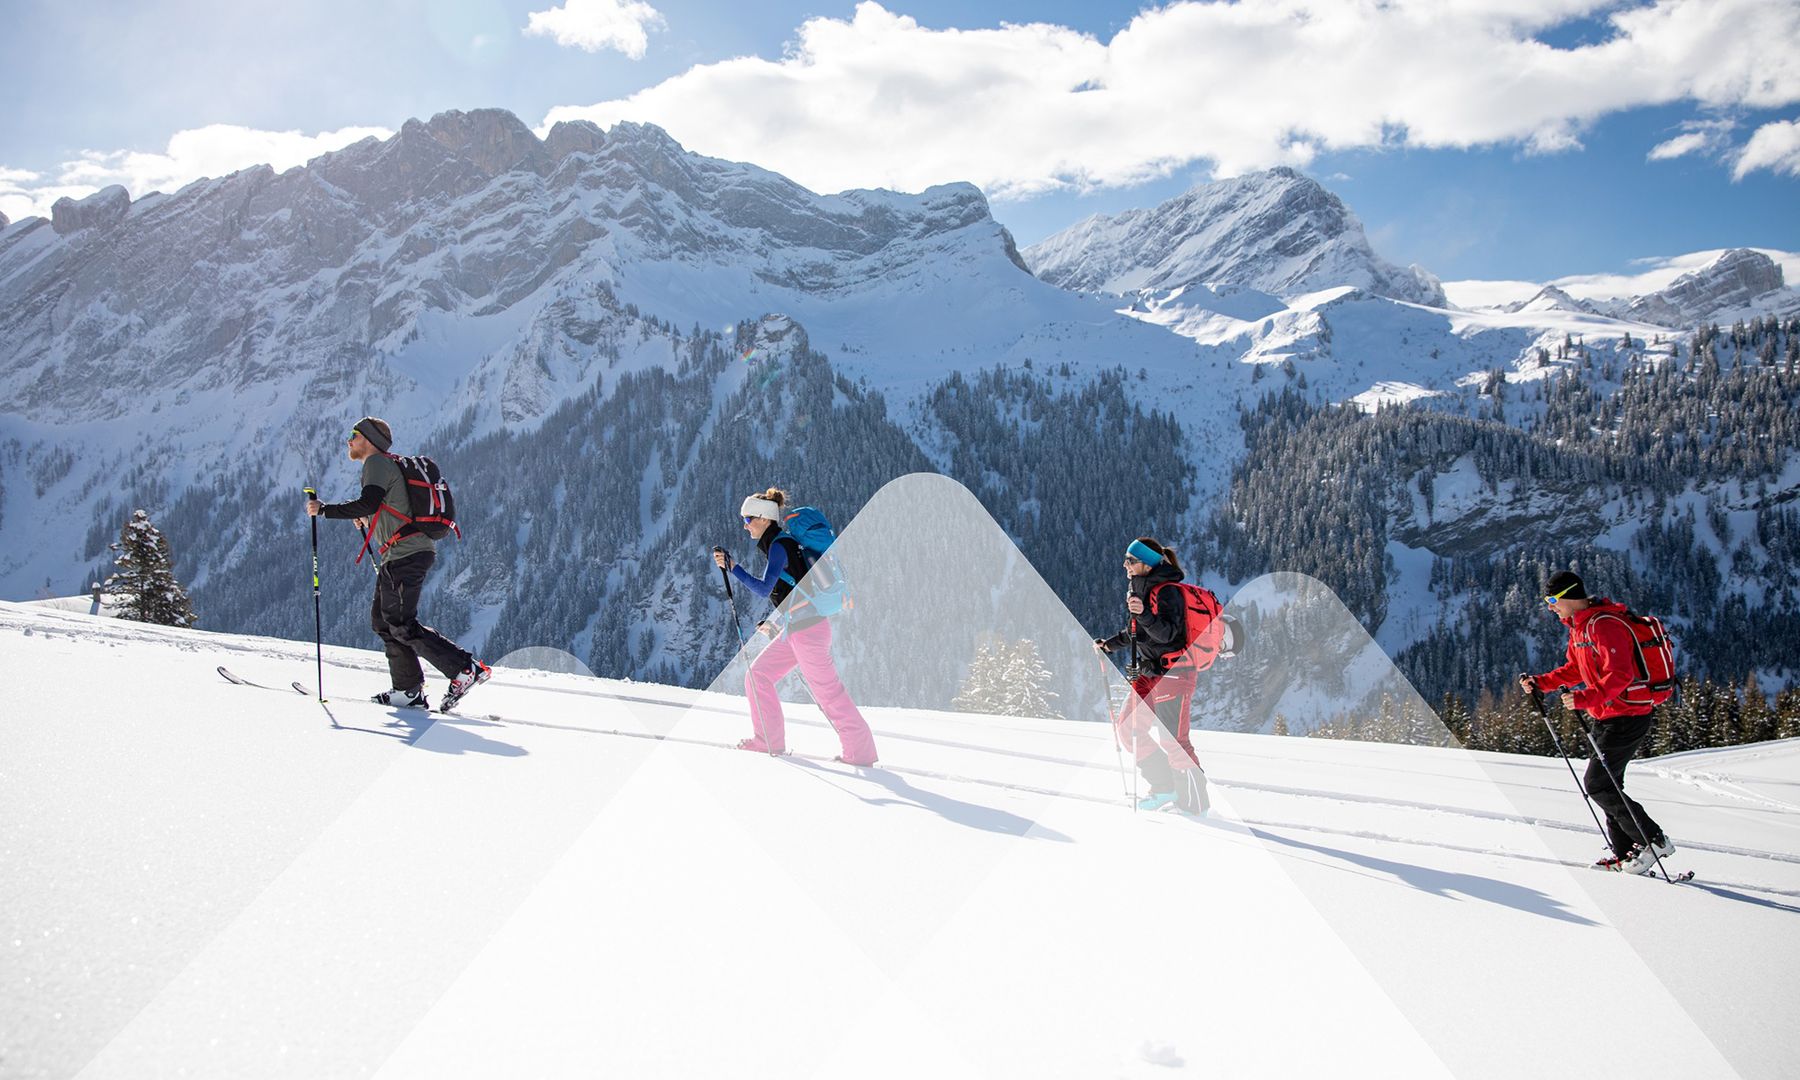 Ski Touring Les Gets, Explore without lifts